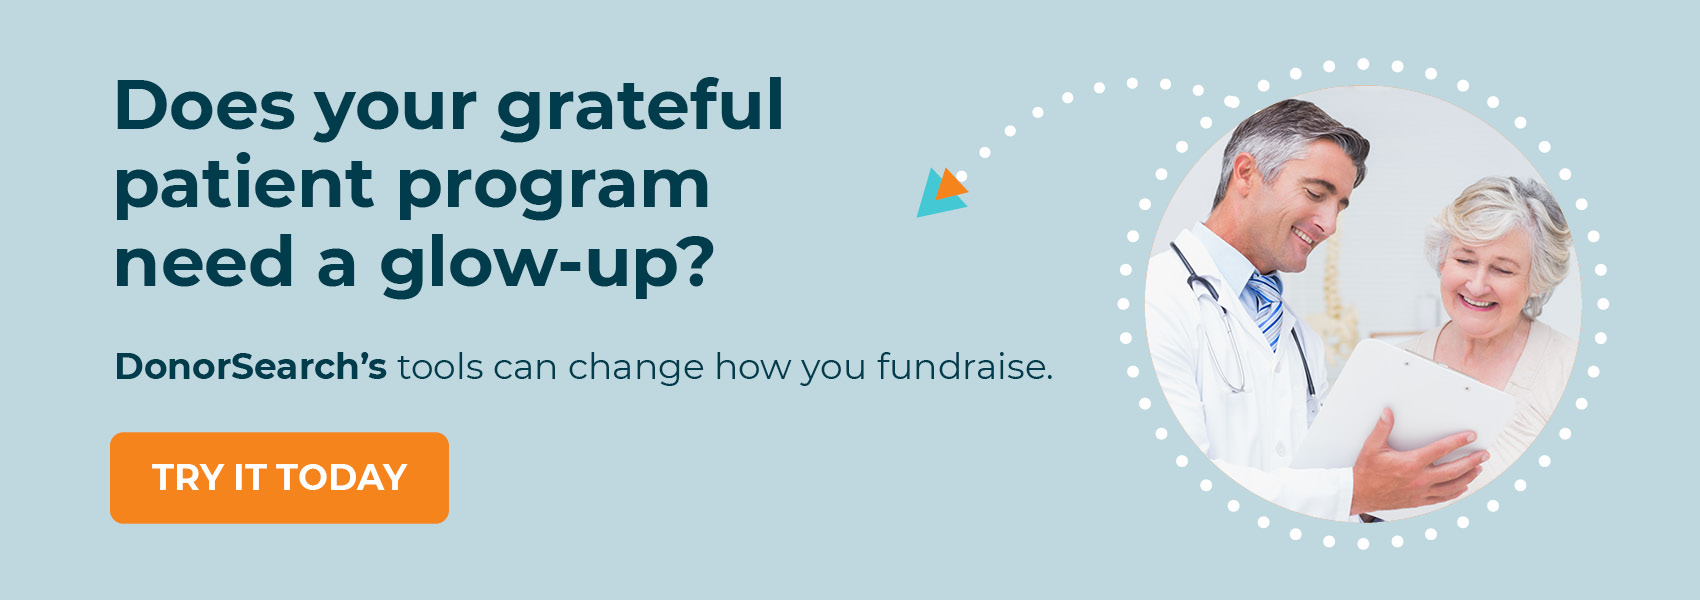 Get a demo of DonorSearch to learn how you can use our tools to make your grateful patient program even better!